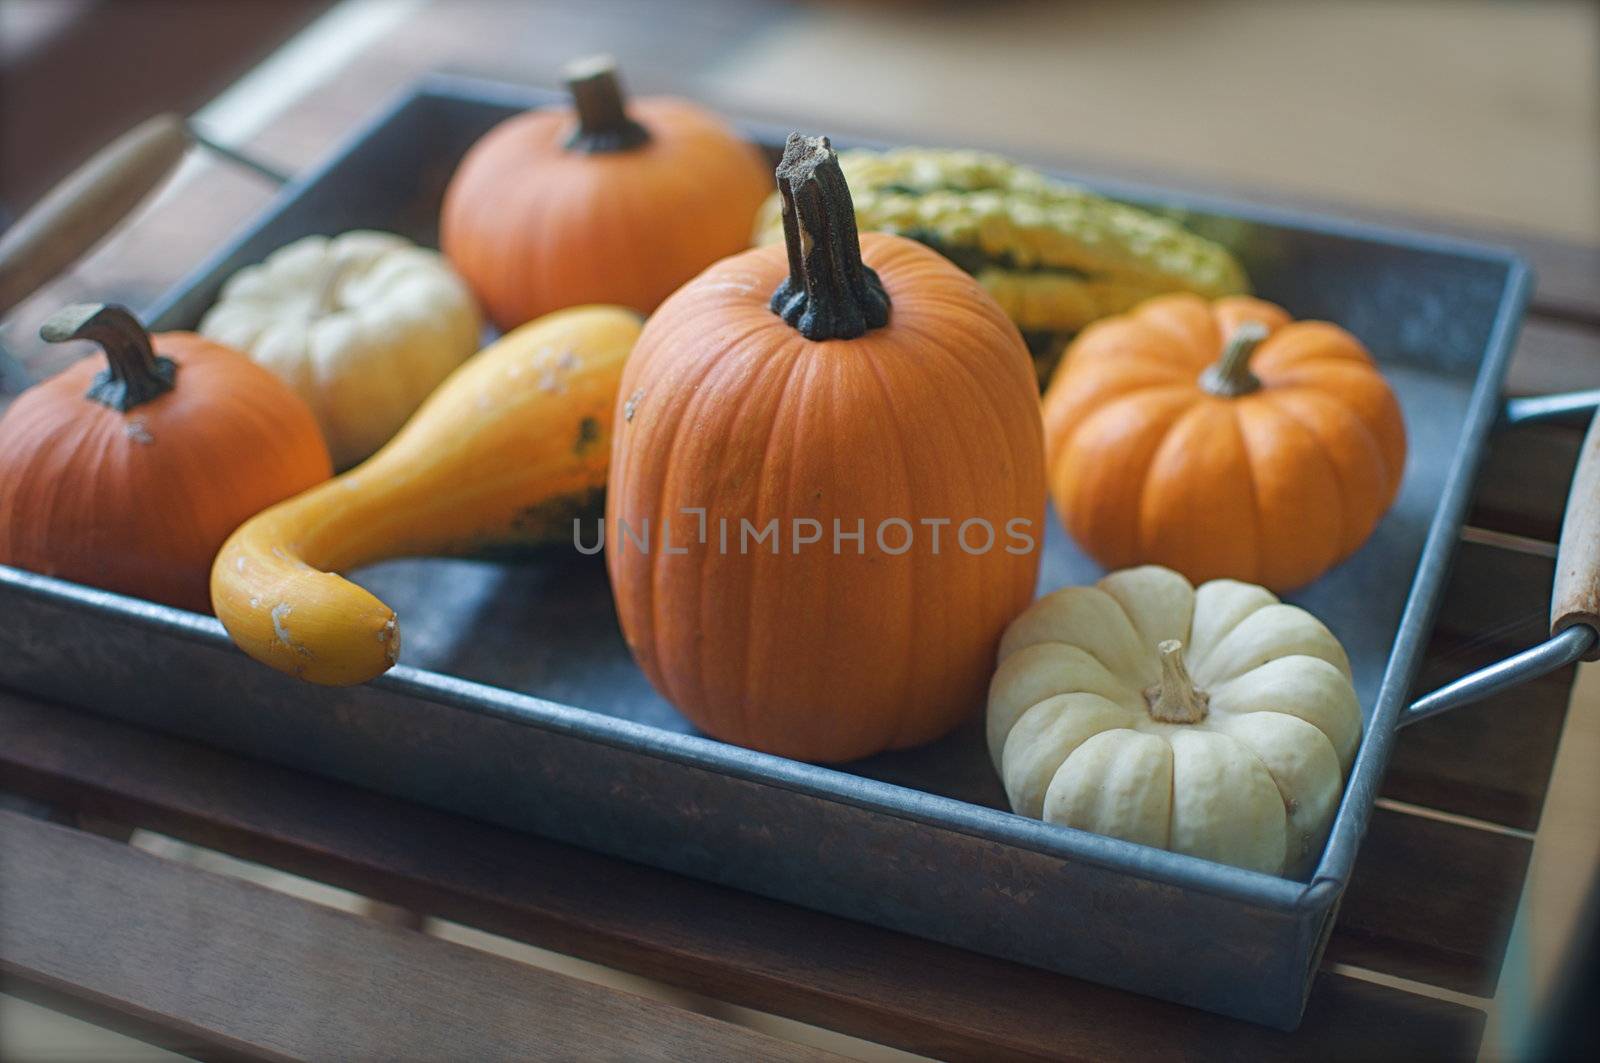 A tray is full of decorative pumpkins and tiny, colorful gourds in all sorts of shapes.